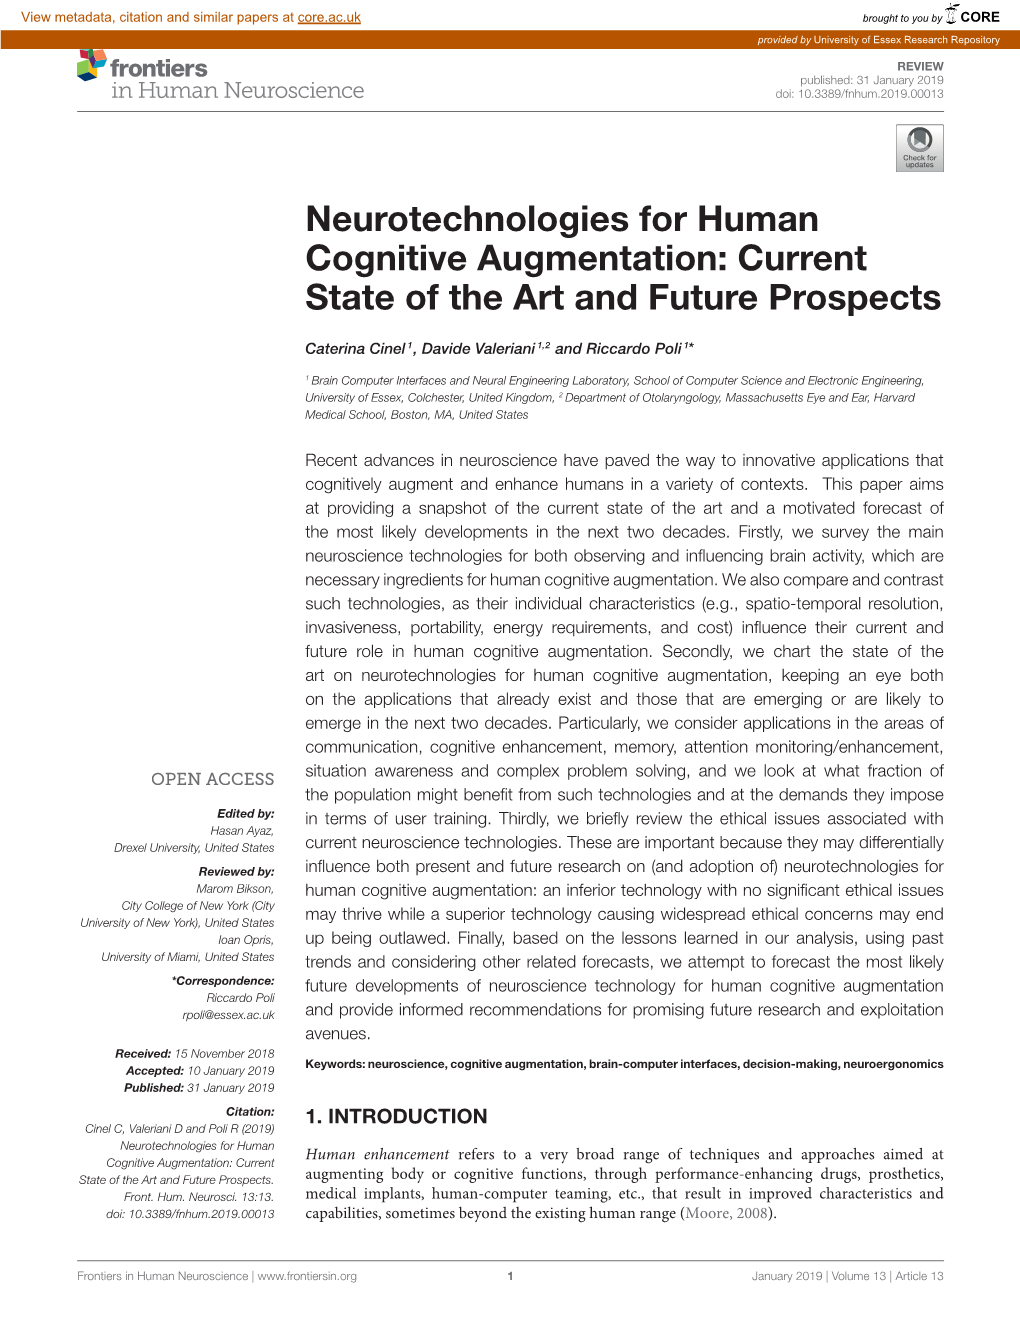 Neurotechnologies for Human Cognitive Augmentation: Current State of the Art and Future Prospects